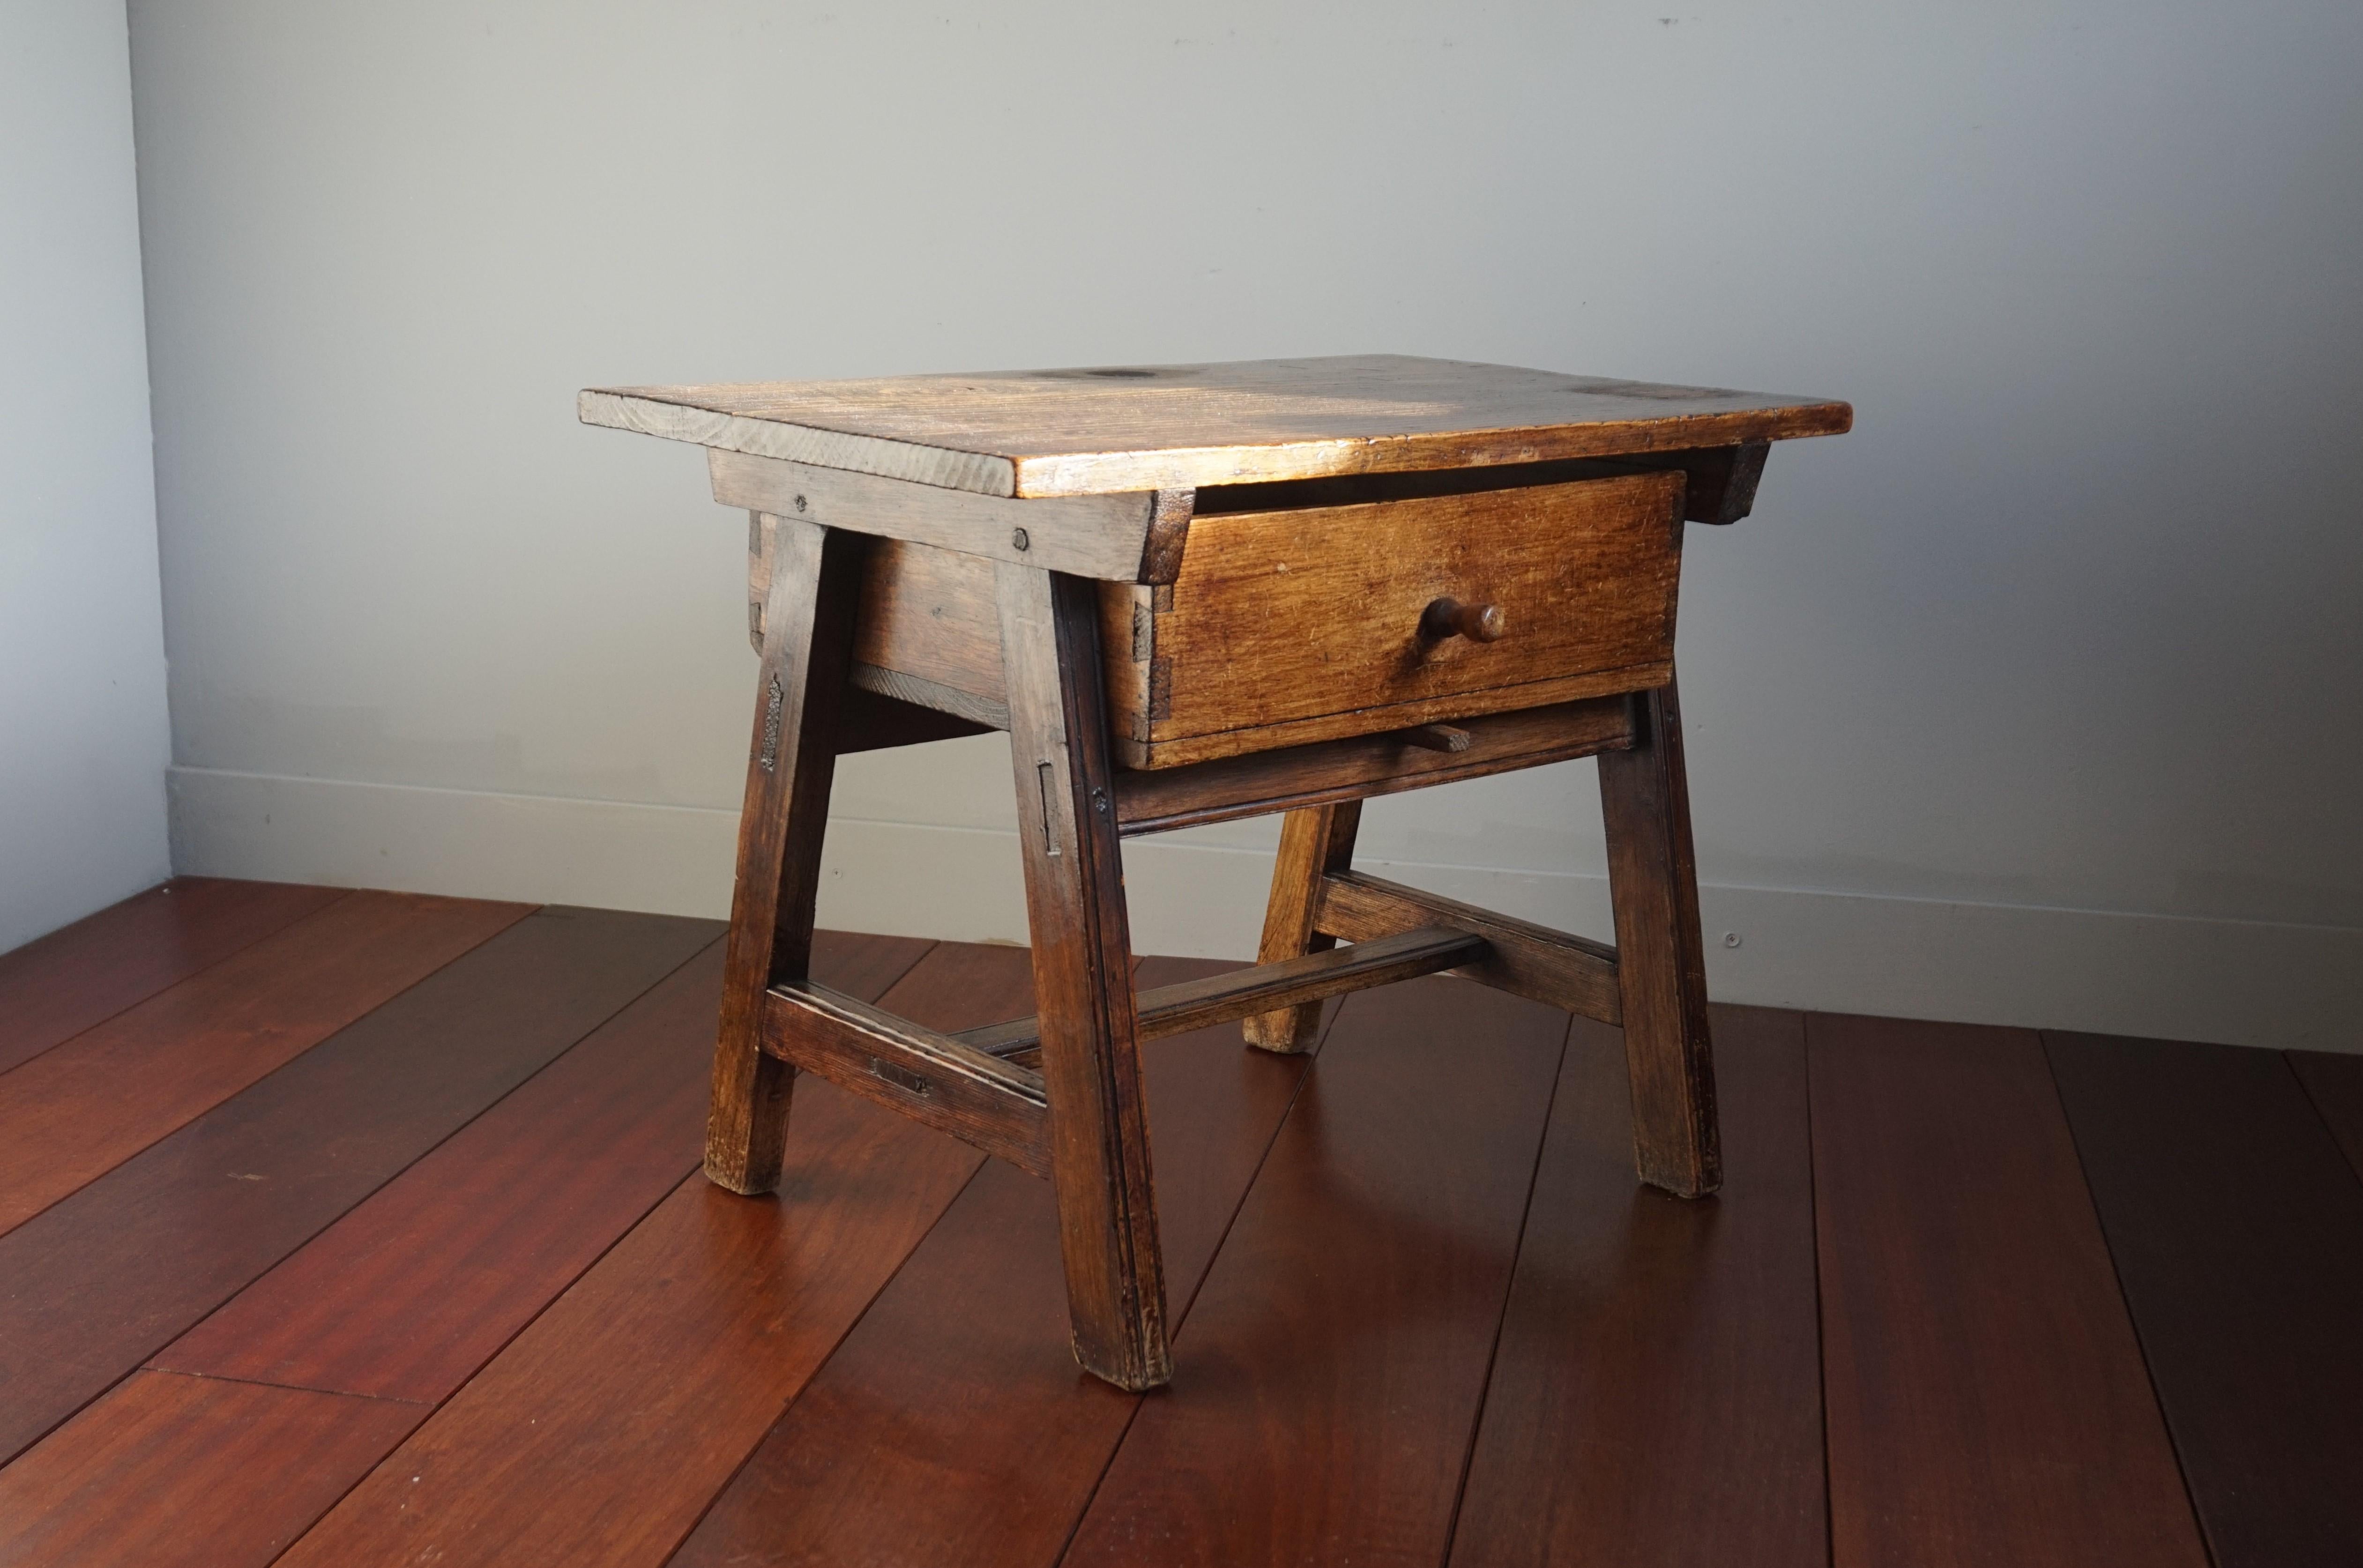 Antique and Rustic Early 1800s Wooden Spanish Countryside Pay Table with Drawer 6